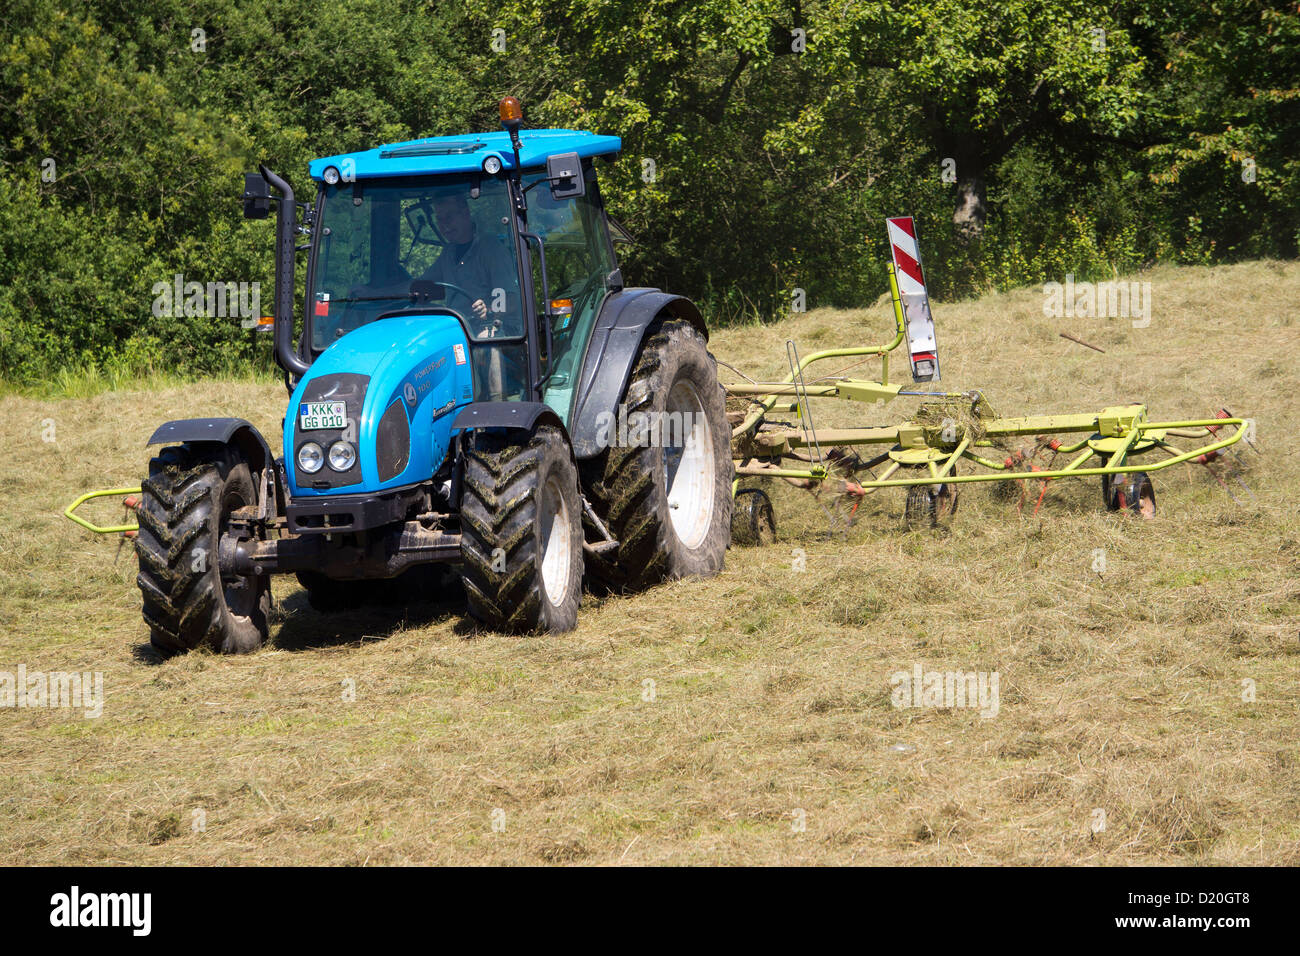 Farmer with tractor used mowed wheat field, Bad Soden Salmunster, Hesse, Germany, Europe Stock Photo